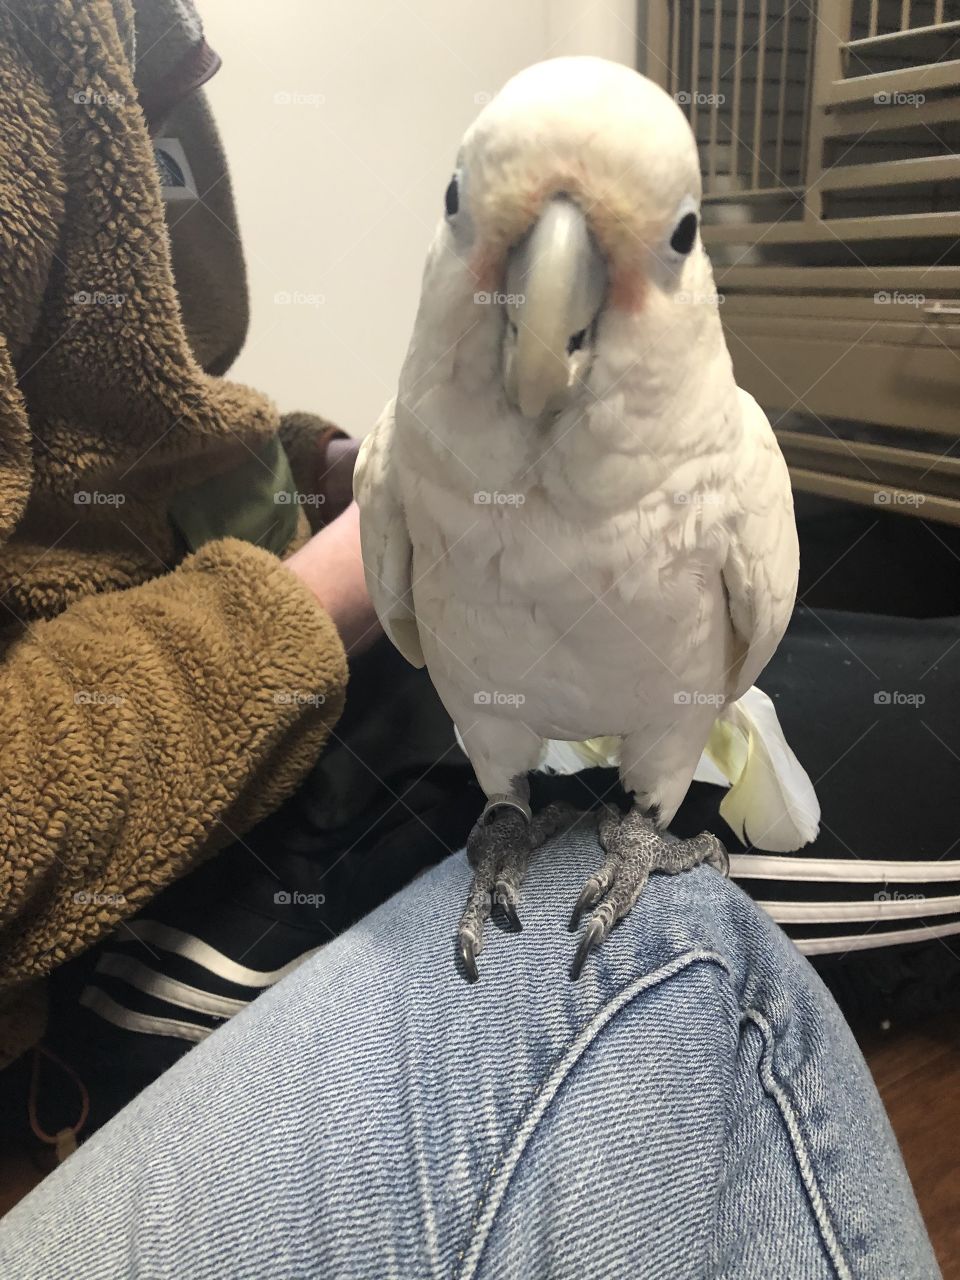 A pink and yellow Cockatoo stands excitedly on my lap and smiles for the camera!